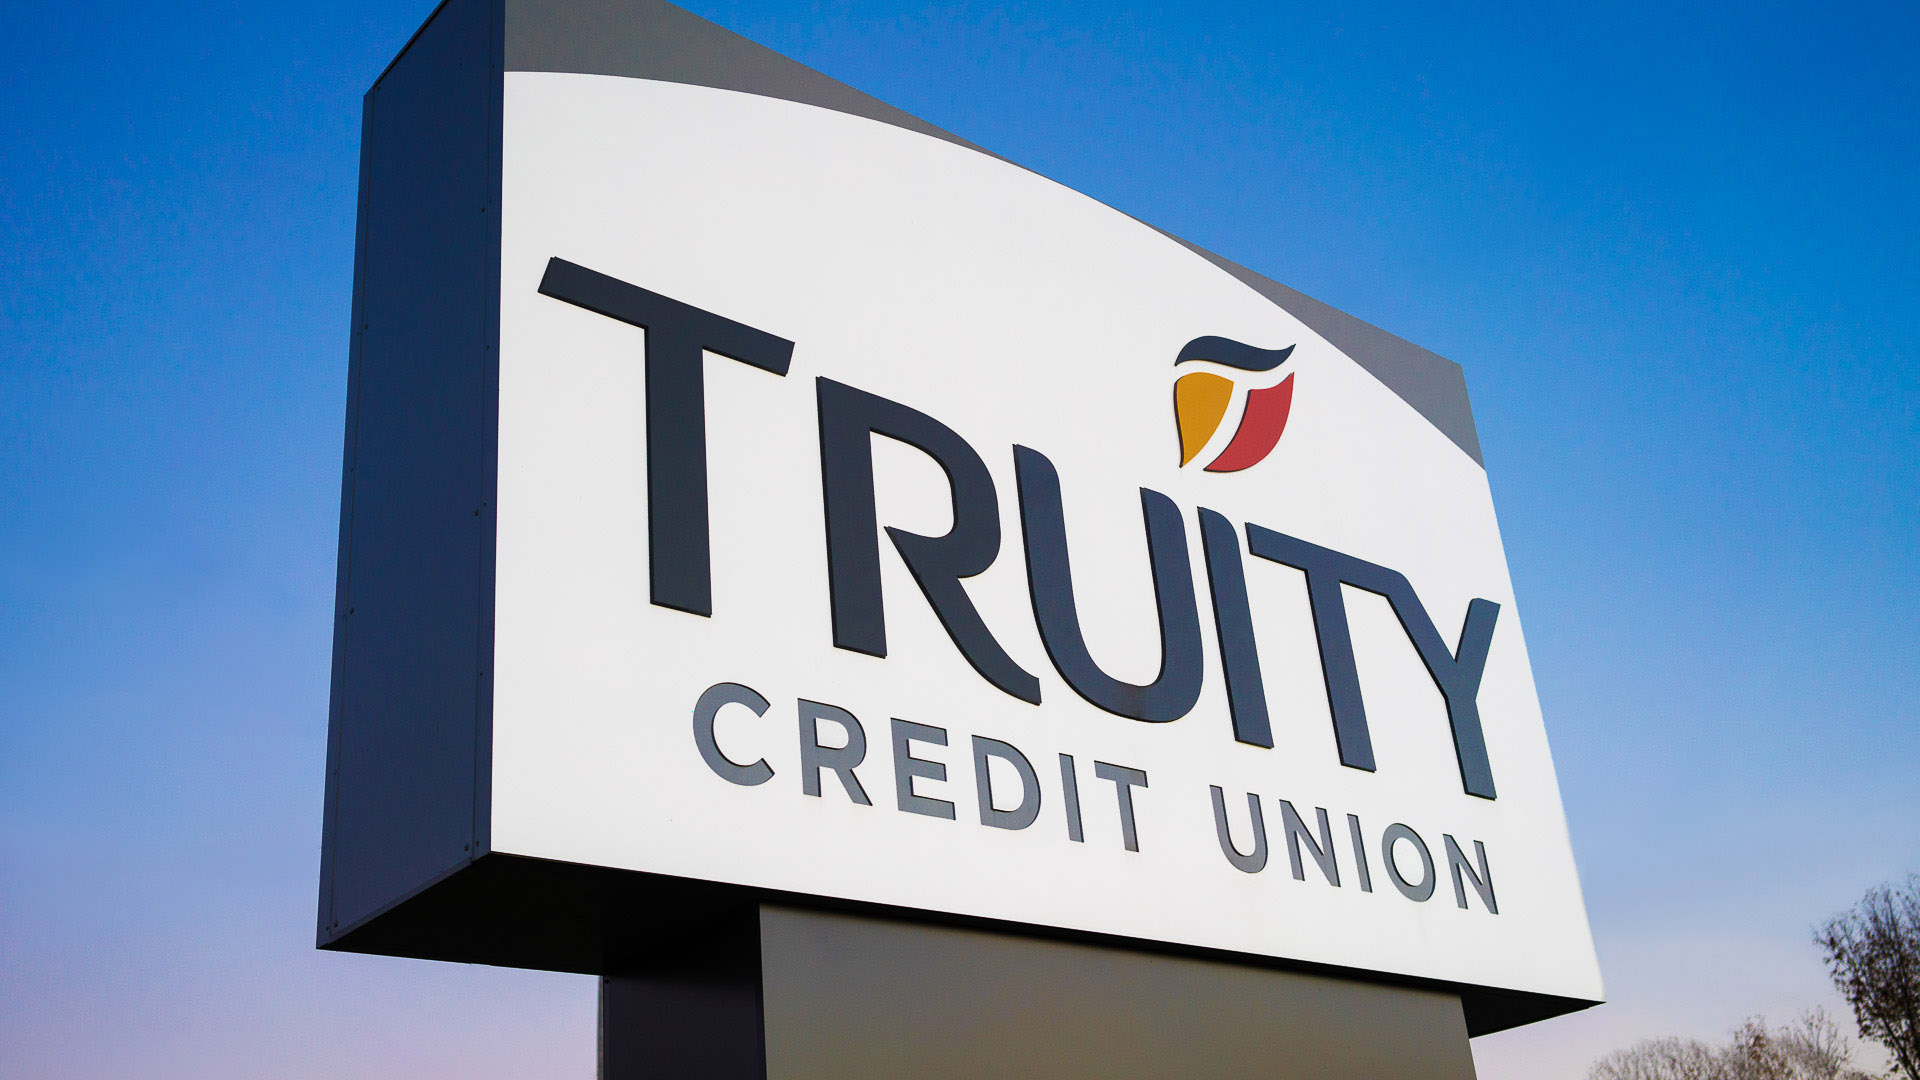 truity-credit-union-lawrence-kansas-sign-01945